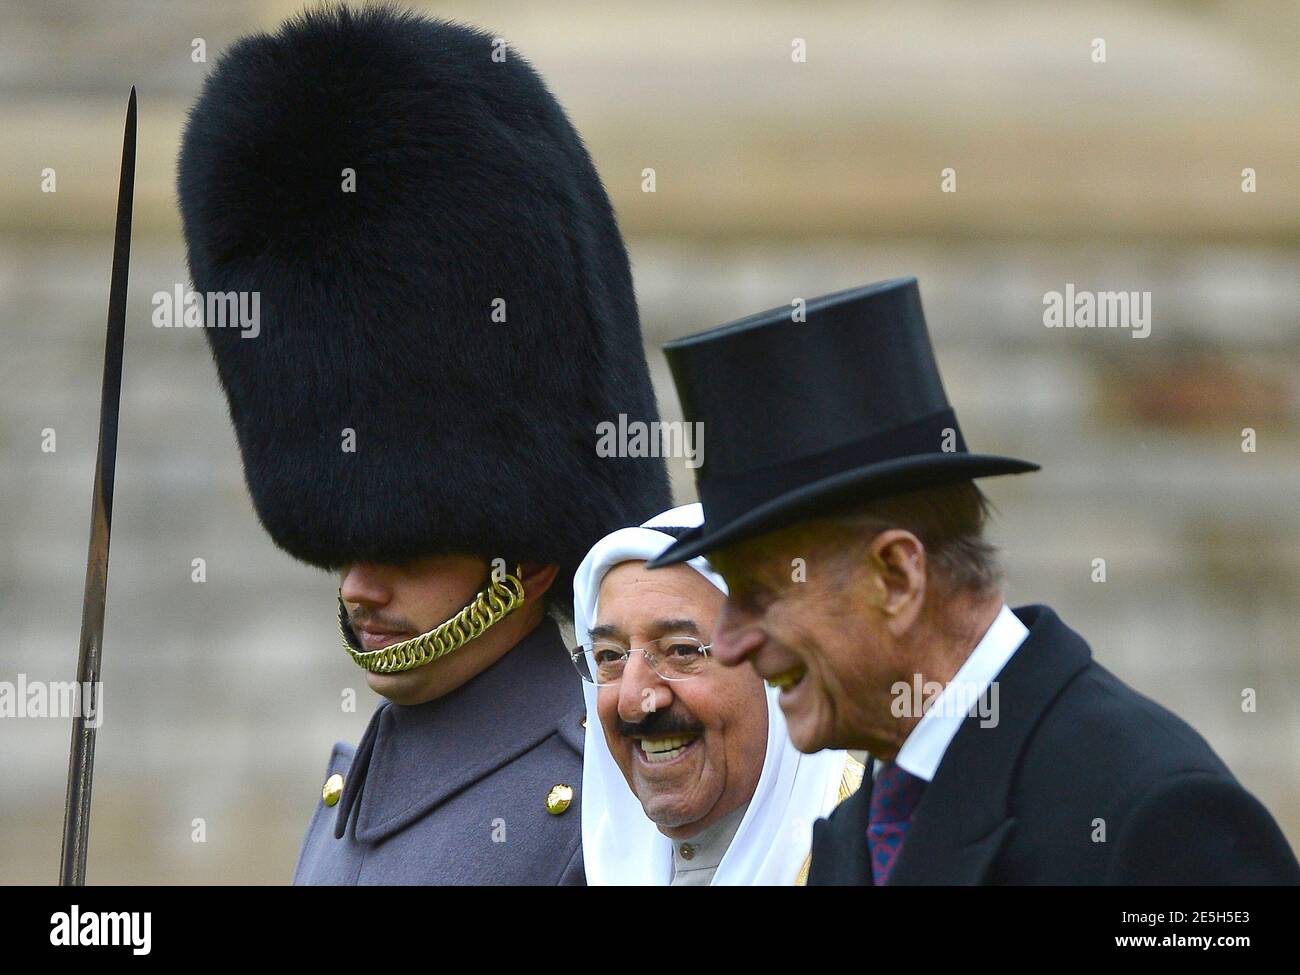 The Emir of Kuwait, Sheikh Sabah al-Ahmad al-Sabah (C), talks to Britain's Prince Philip (R) as he inspects members of the 1st Battalion Irish Guards at Windsor Castle in Windsor, southern England November 27, 2012. The Emir arrived at Windsor Castle on Tuesday for the start of a state visit to Britain.    REUTERS/Toby Melville (BRITAIN - Tags: ENTERTAINMENT POLITICS SOCIETY ROYALS) Stock Photo